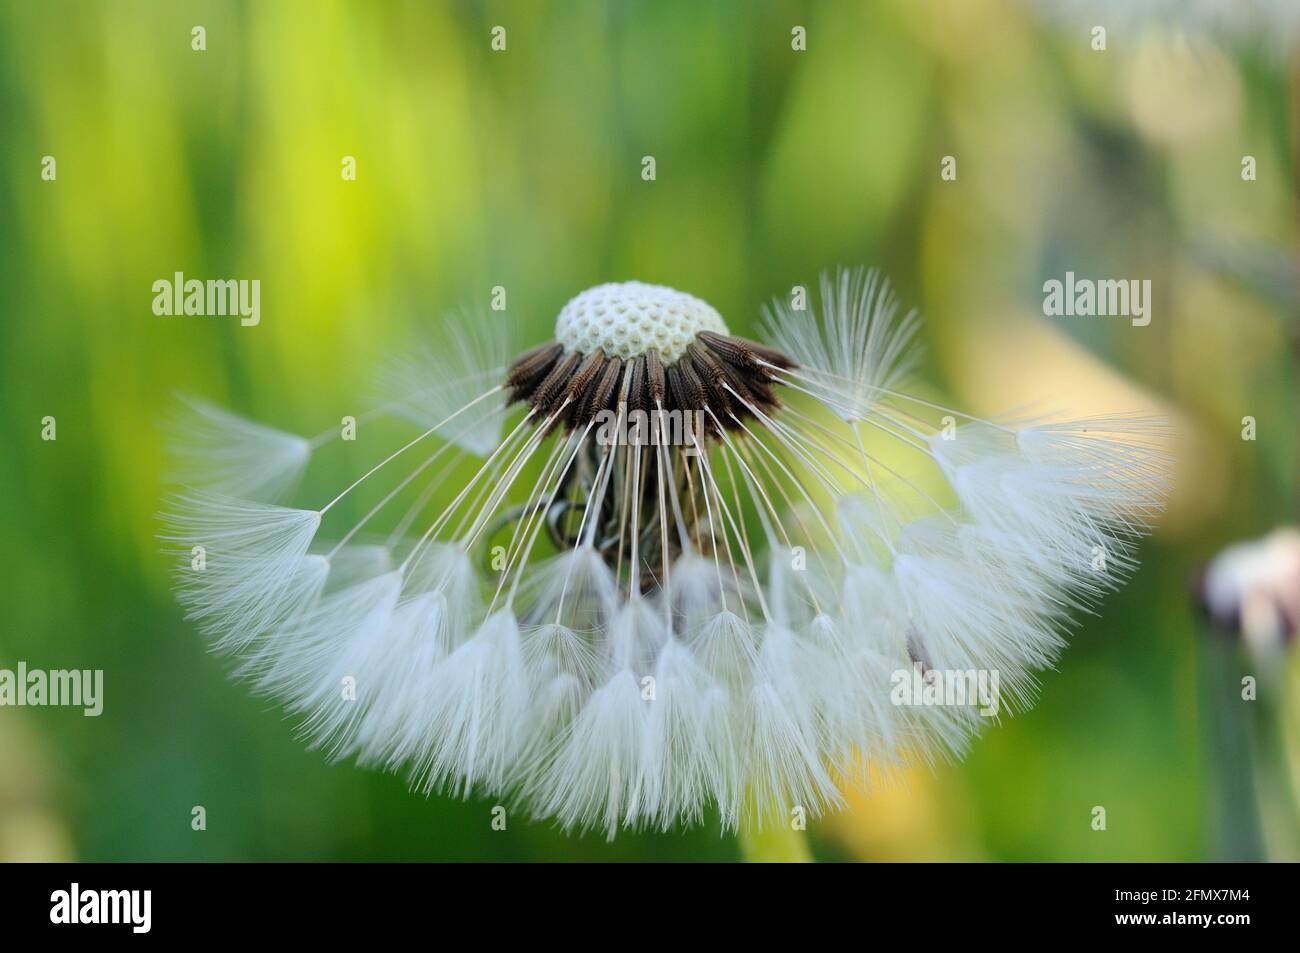 Dandelion with white stamens in spring closeup. Shallow depth of field Stock Photo